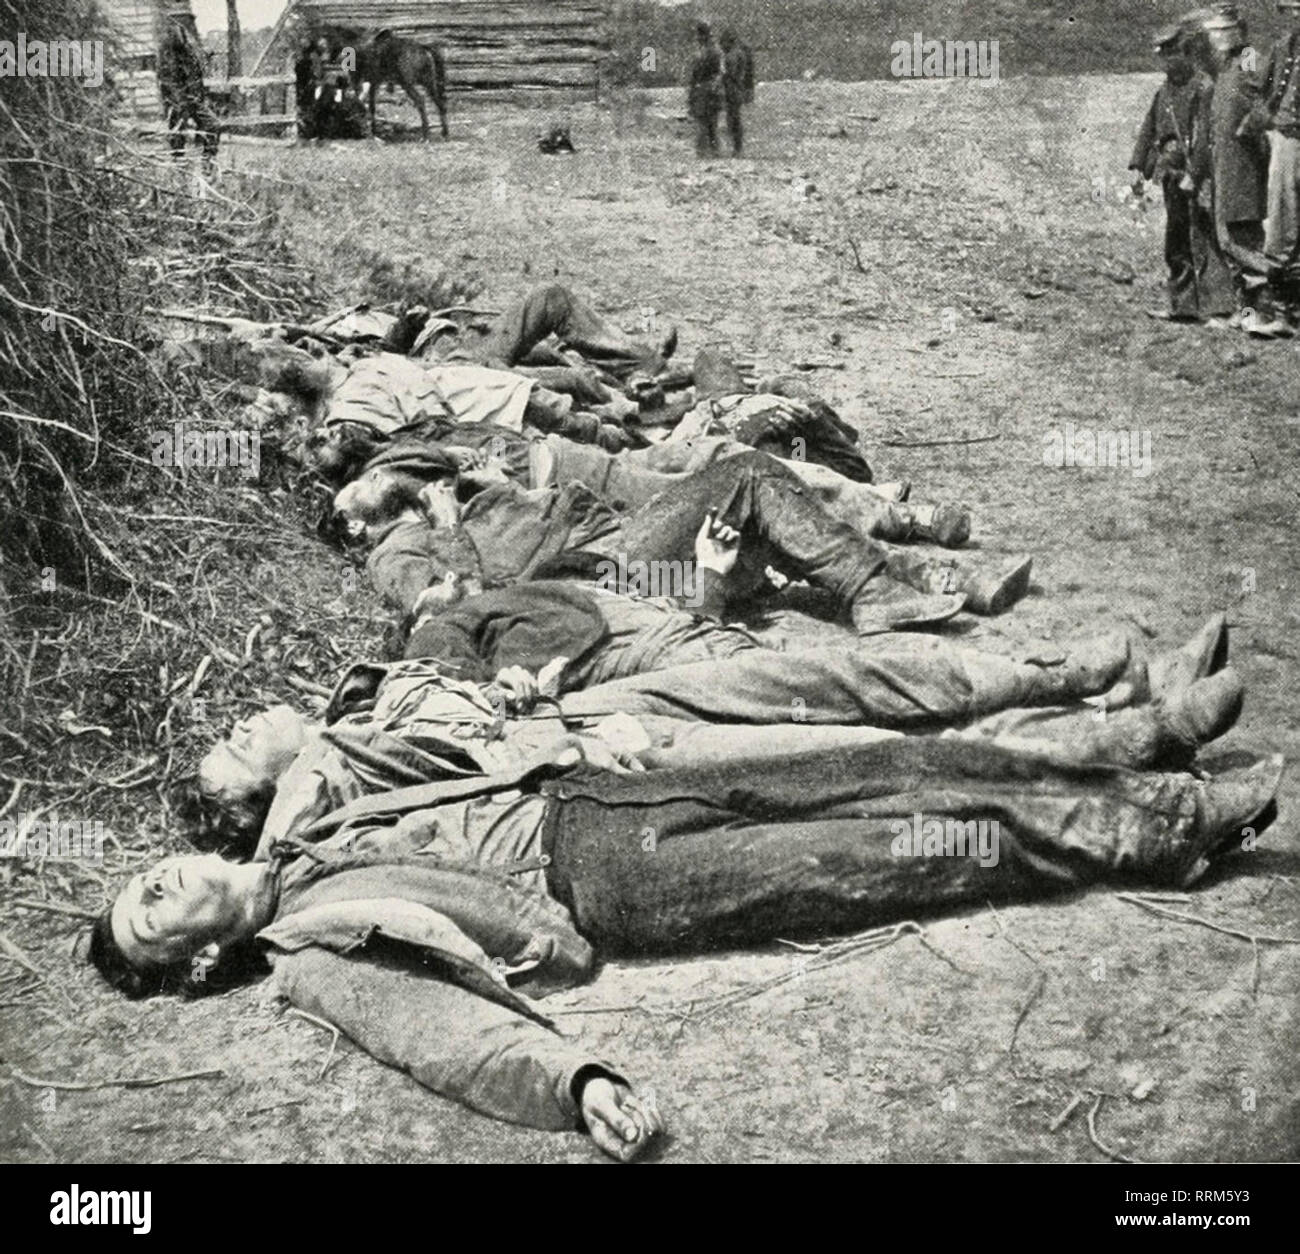 Confederate dead of General Ewell's Corps who attacked the Union lines at the Battle of Spotsylvania. May 1864 Stock Photo